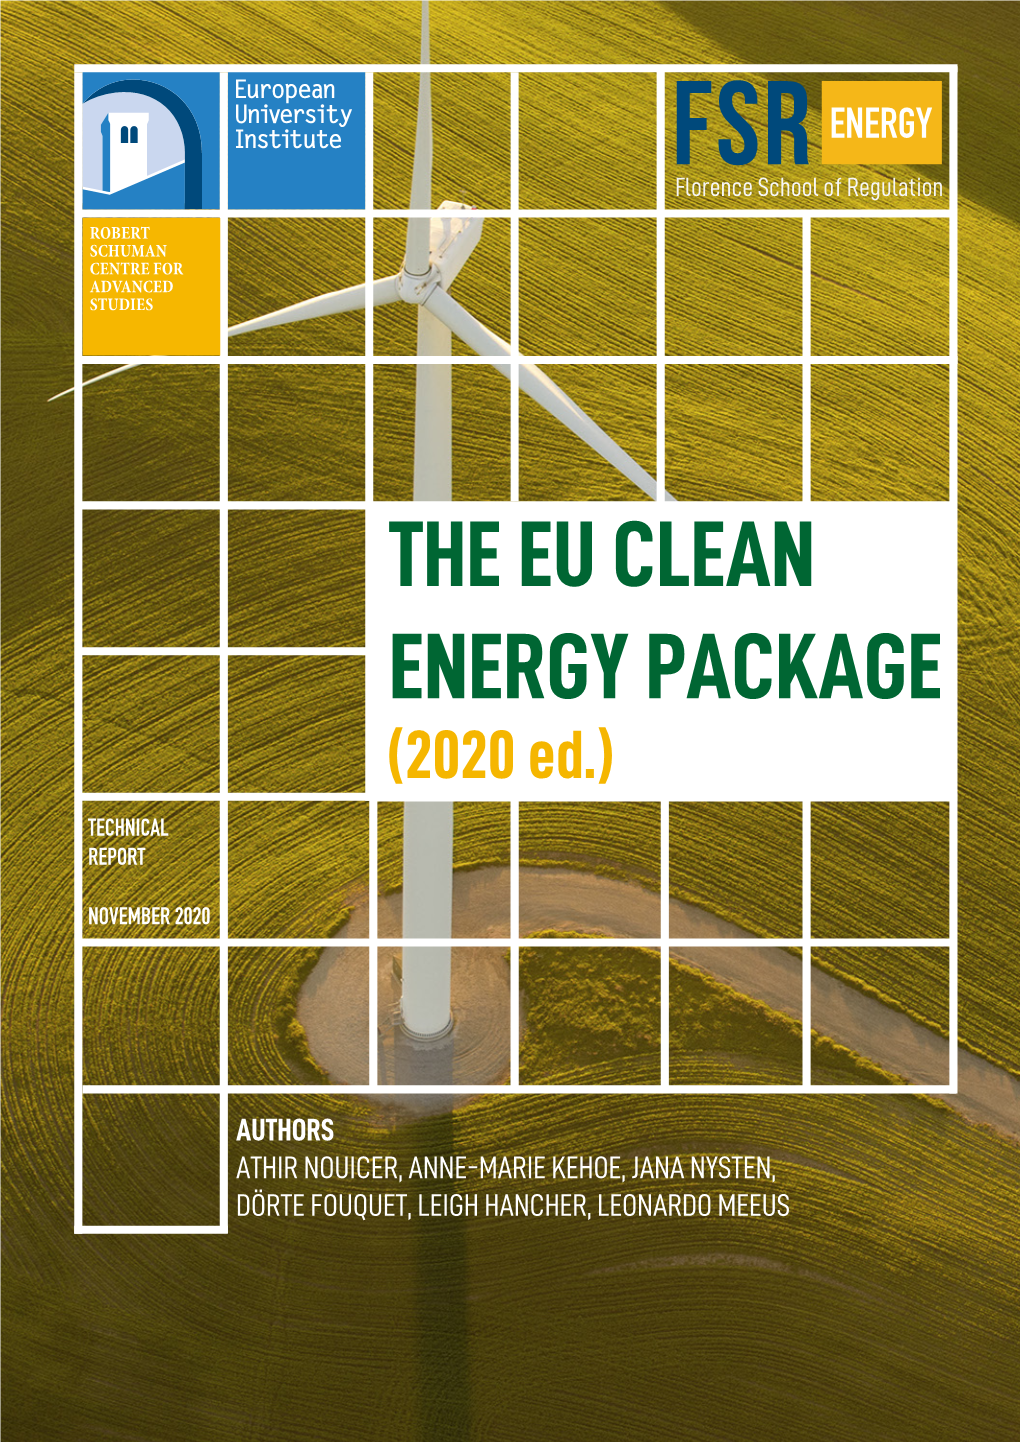 THE EU CLEAN ENERGY PACKAGE (2020 Ed.)